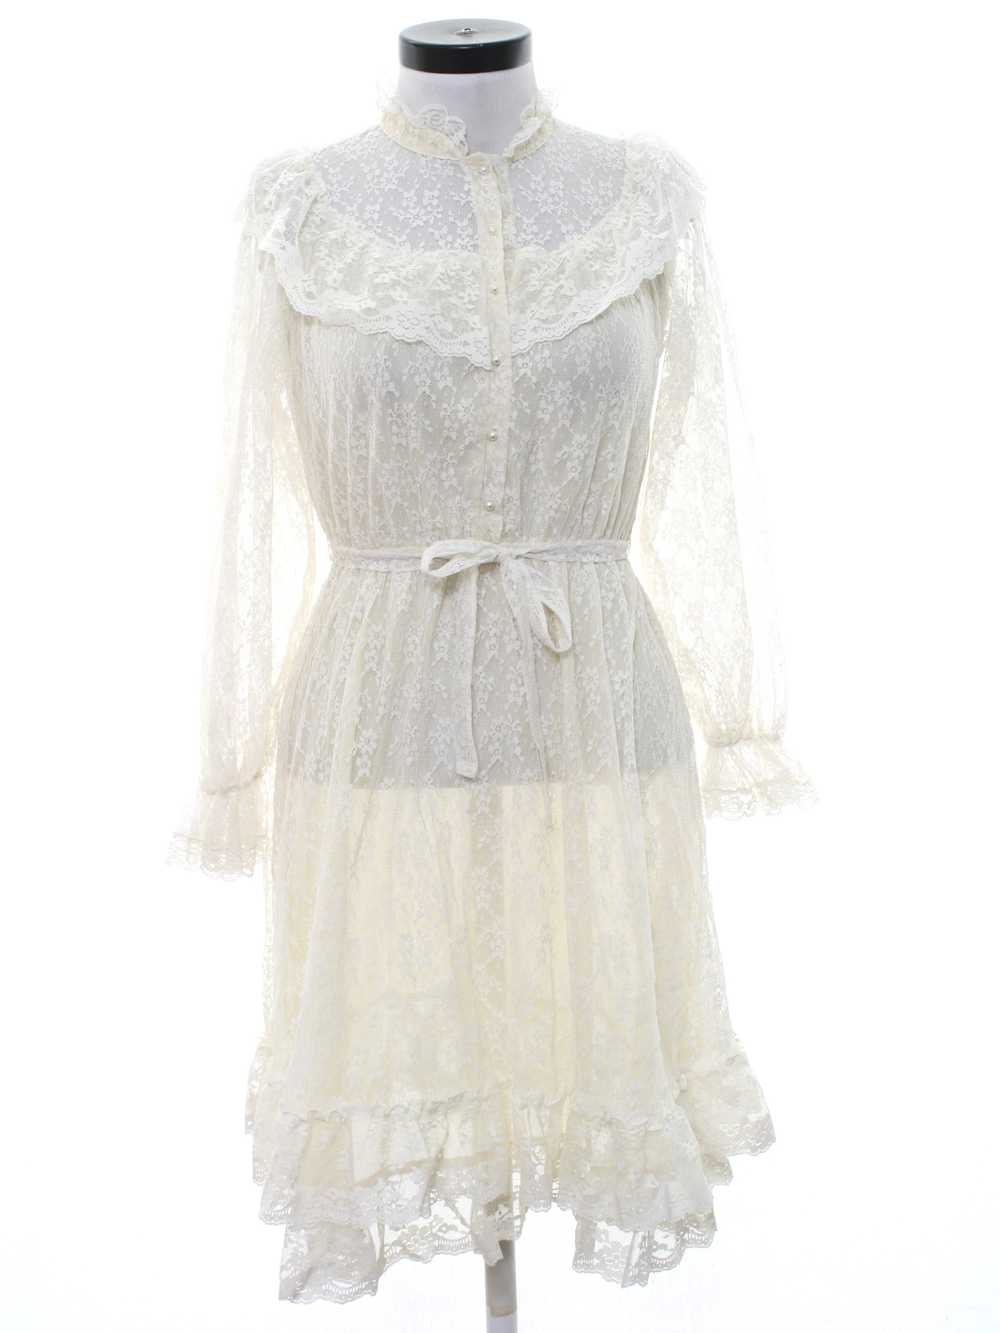 1970's or Early 80s Prairie Style Cocktail Dress - image 1